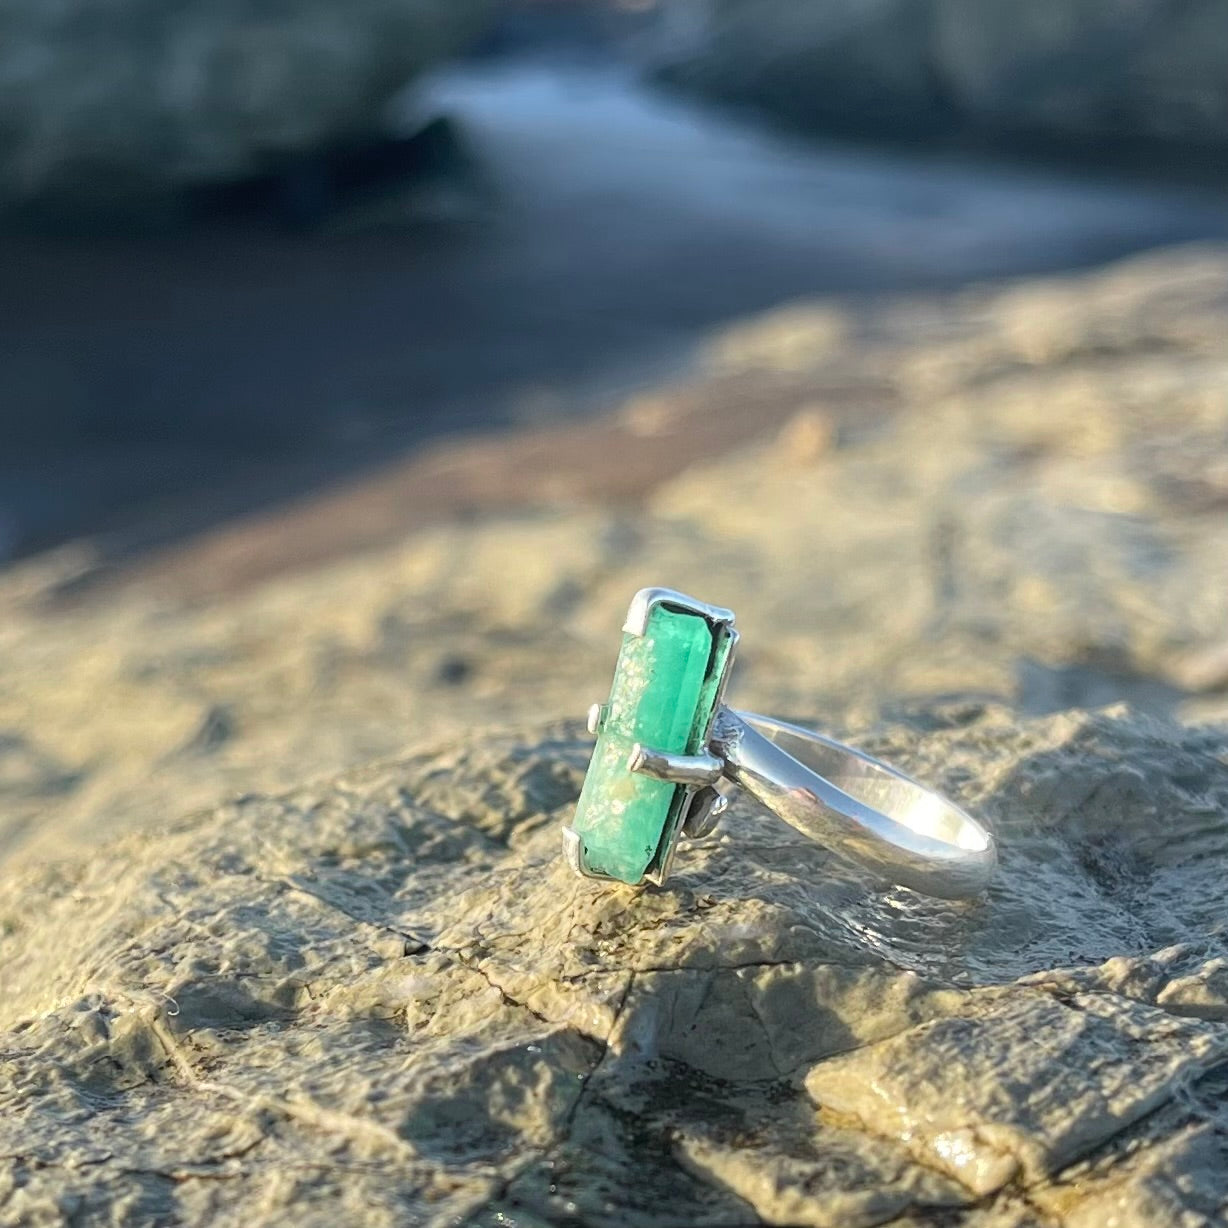 Raw Emerald Faceted Crystal with Sterling Silver Pronged Ring Setting-Jenstones Jewelry